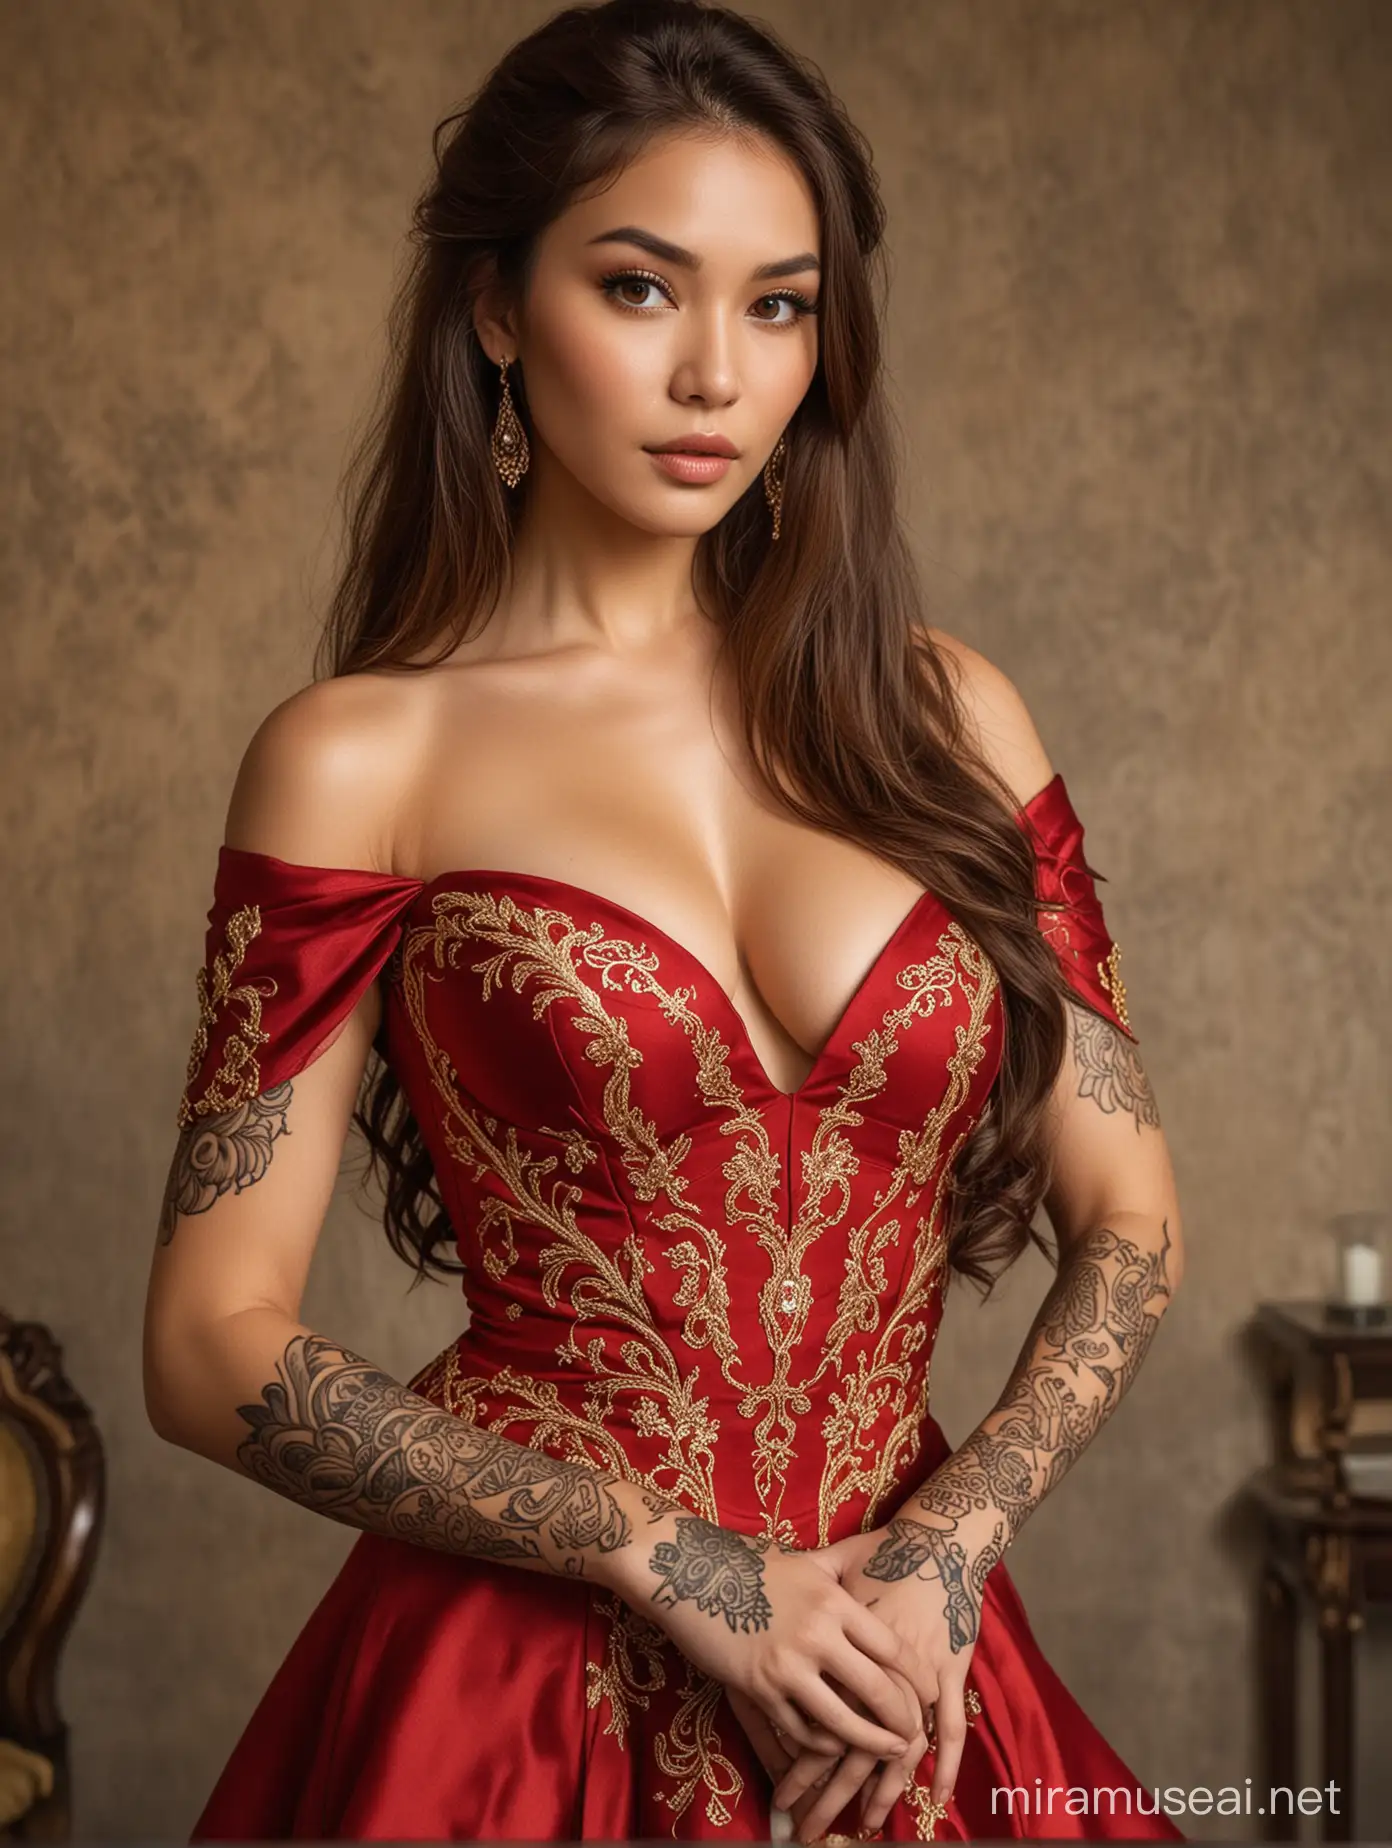 Royal Handmaiden in Regal Red and Gold Gown with Tattooed Wrist